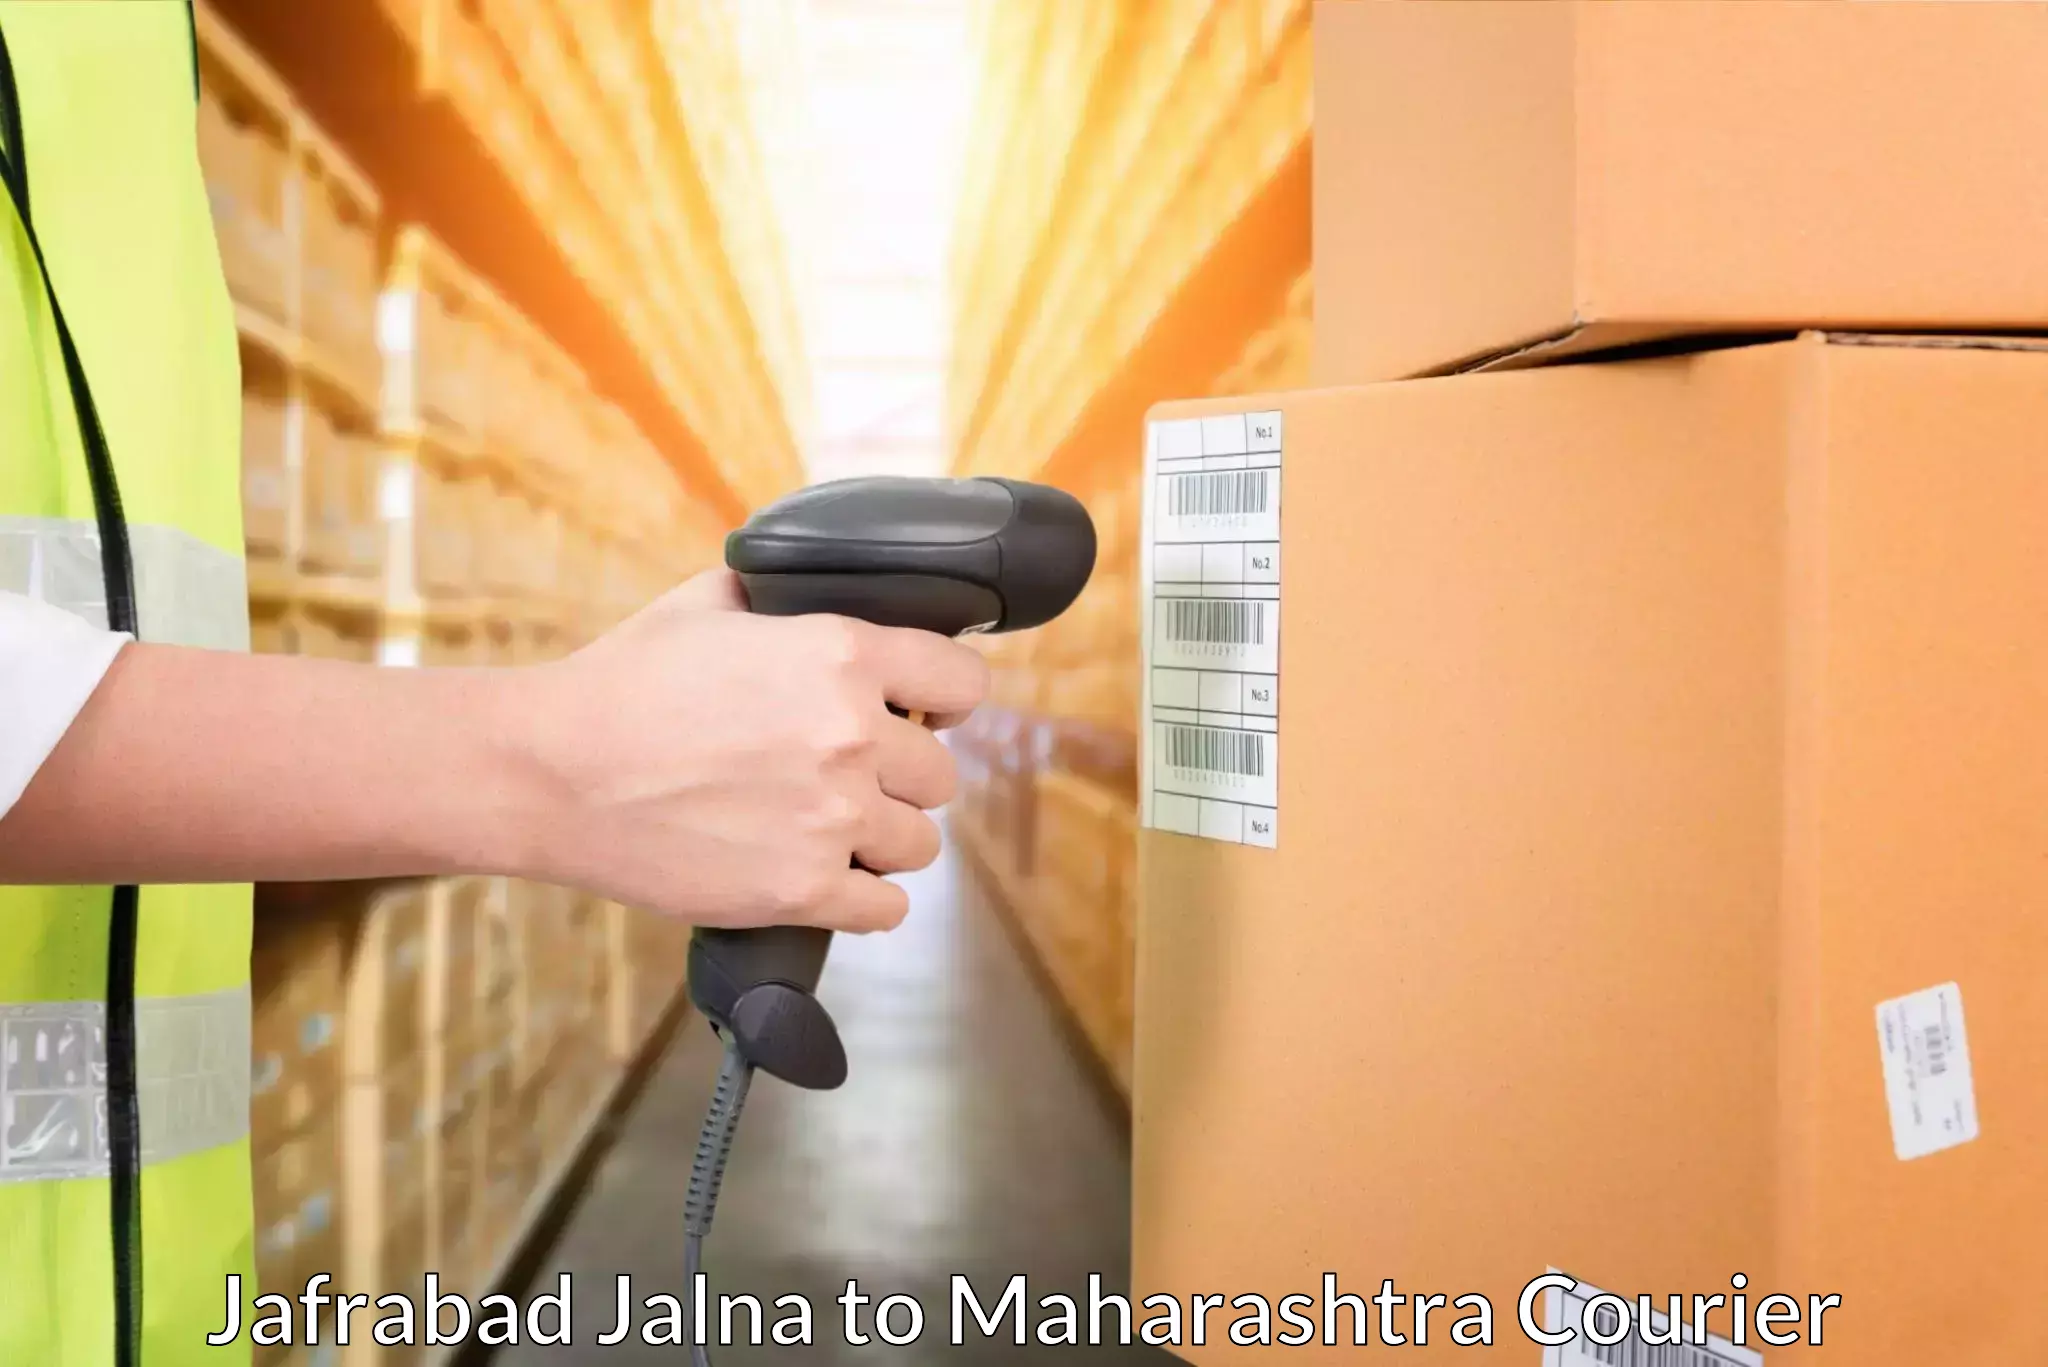 24-hour courier services in Jafrabad Jalna to Sawantwadi